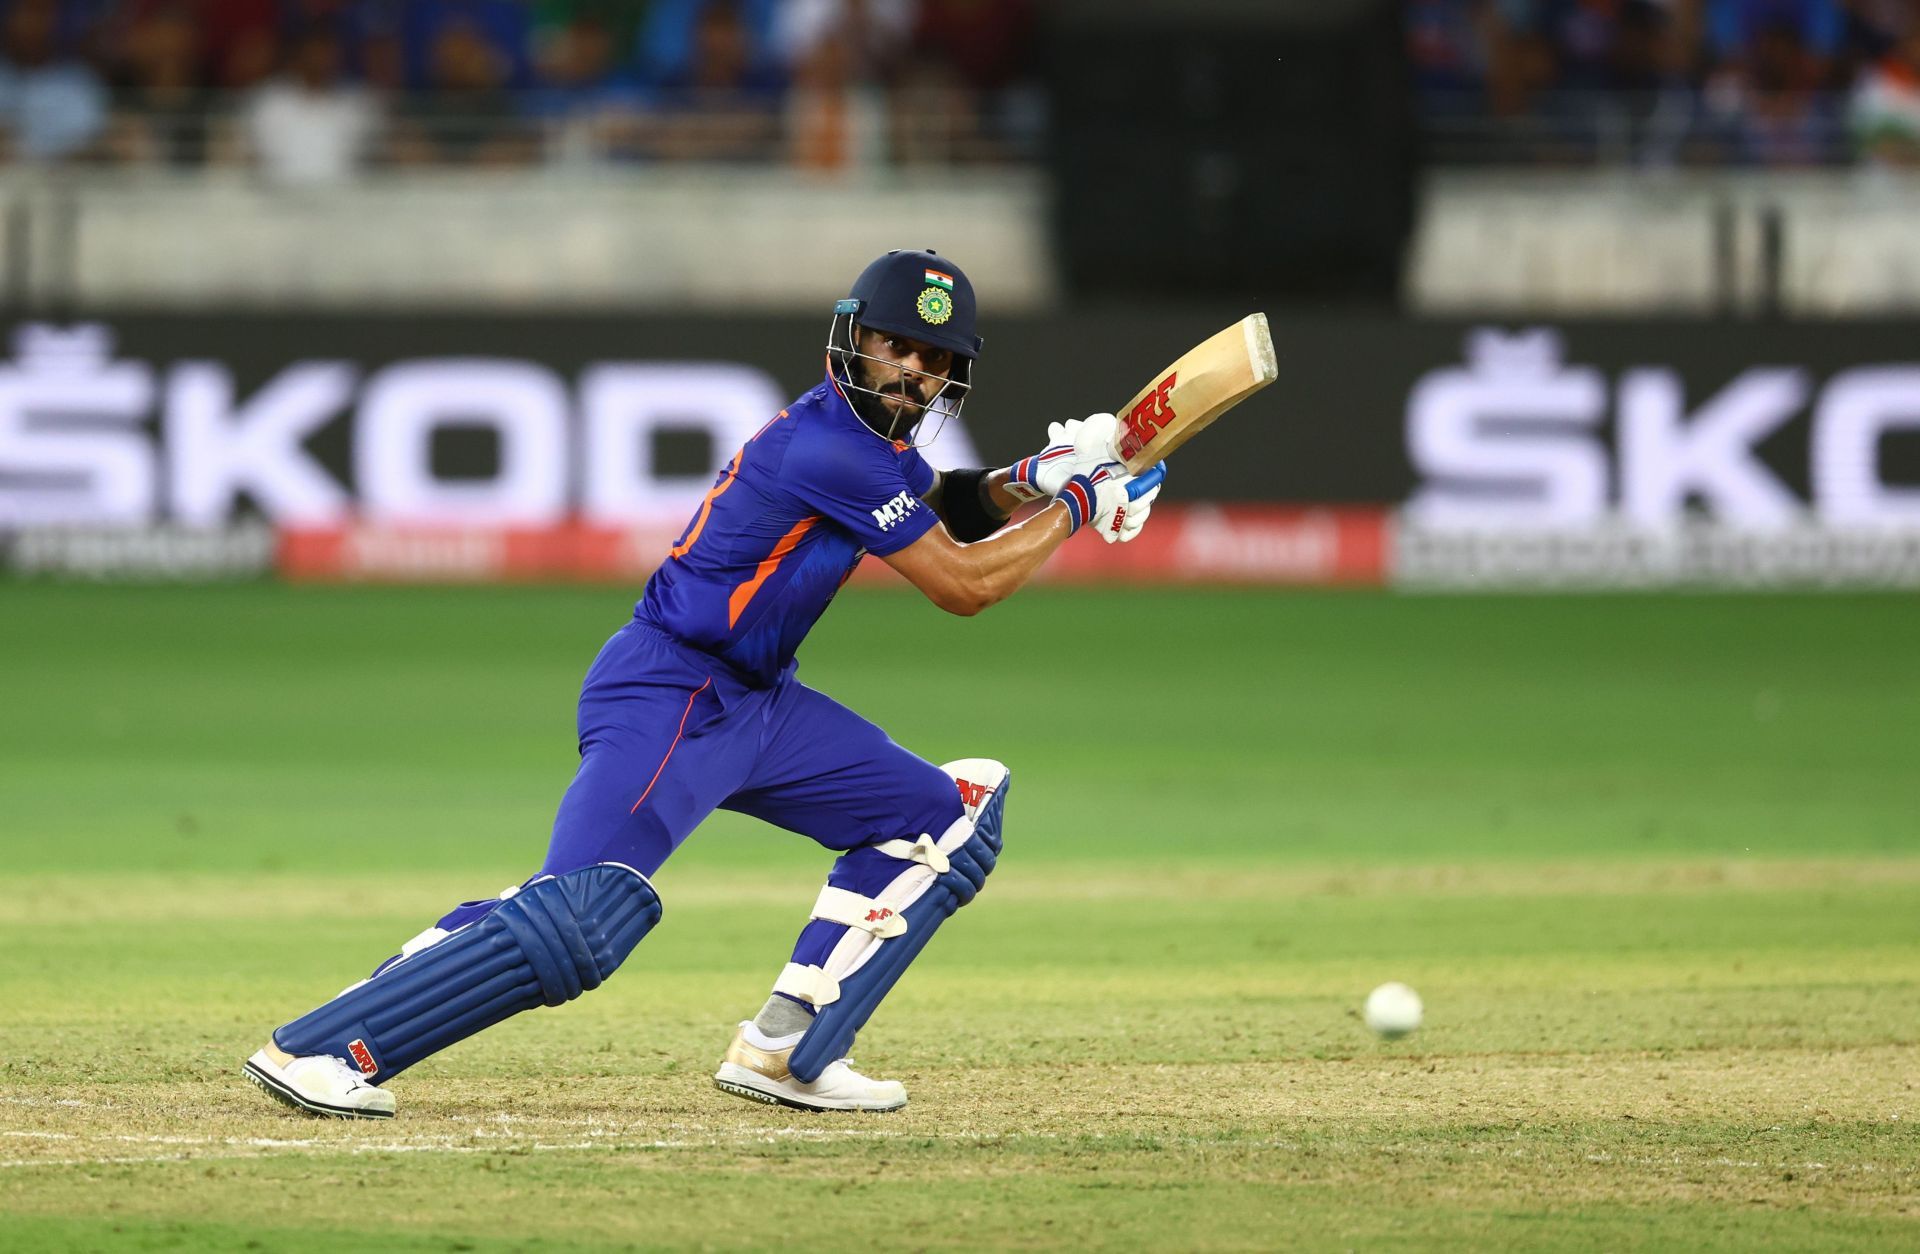 Virat Kohli hit three fours and a six during his innings